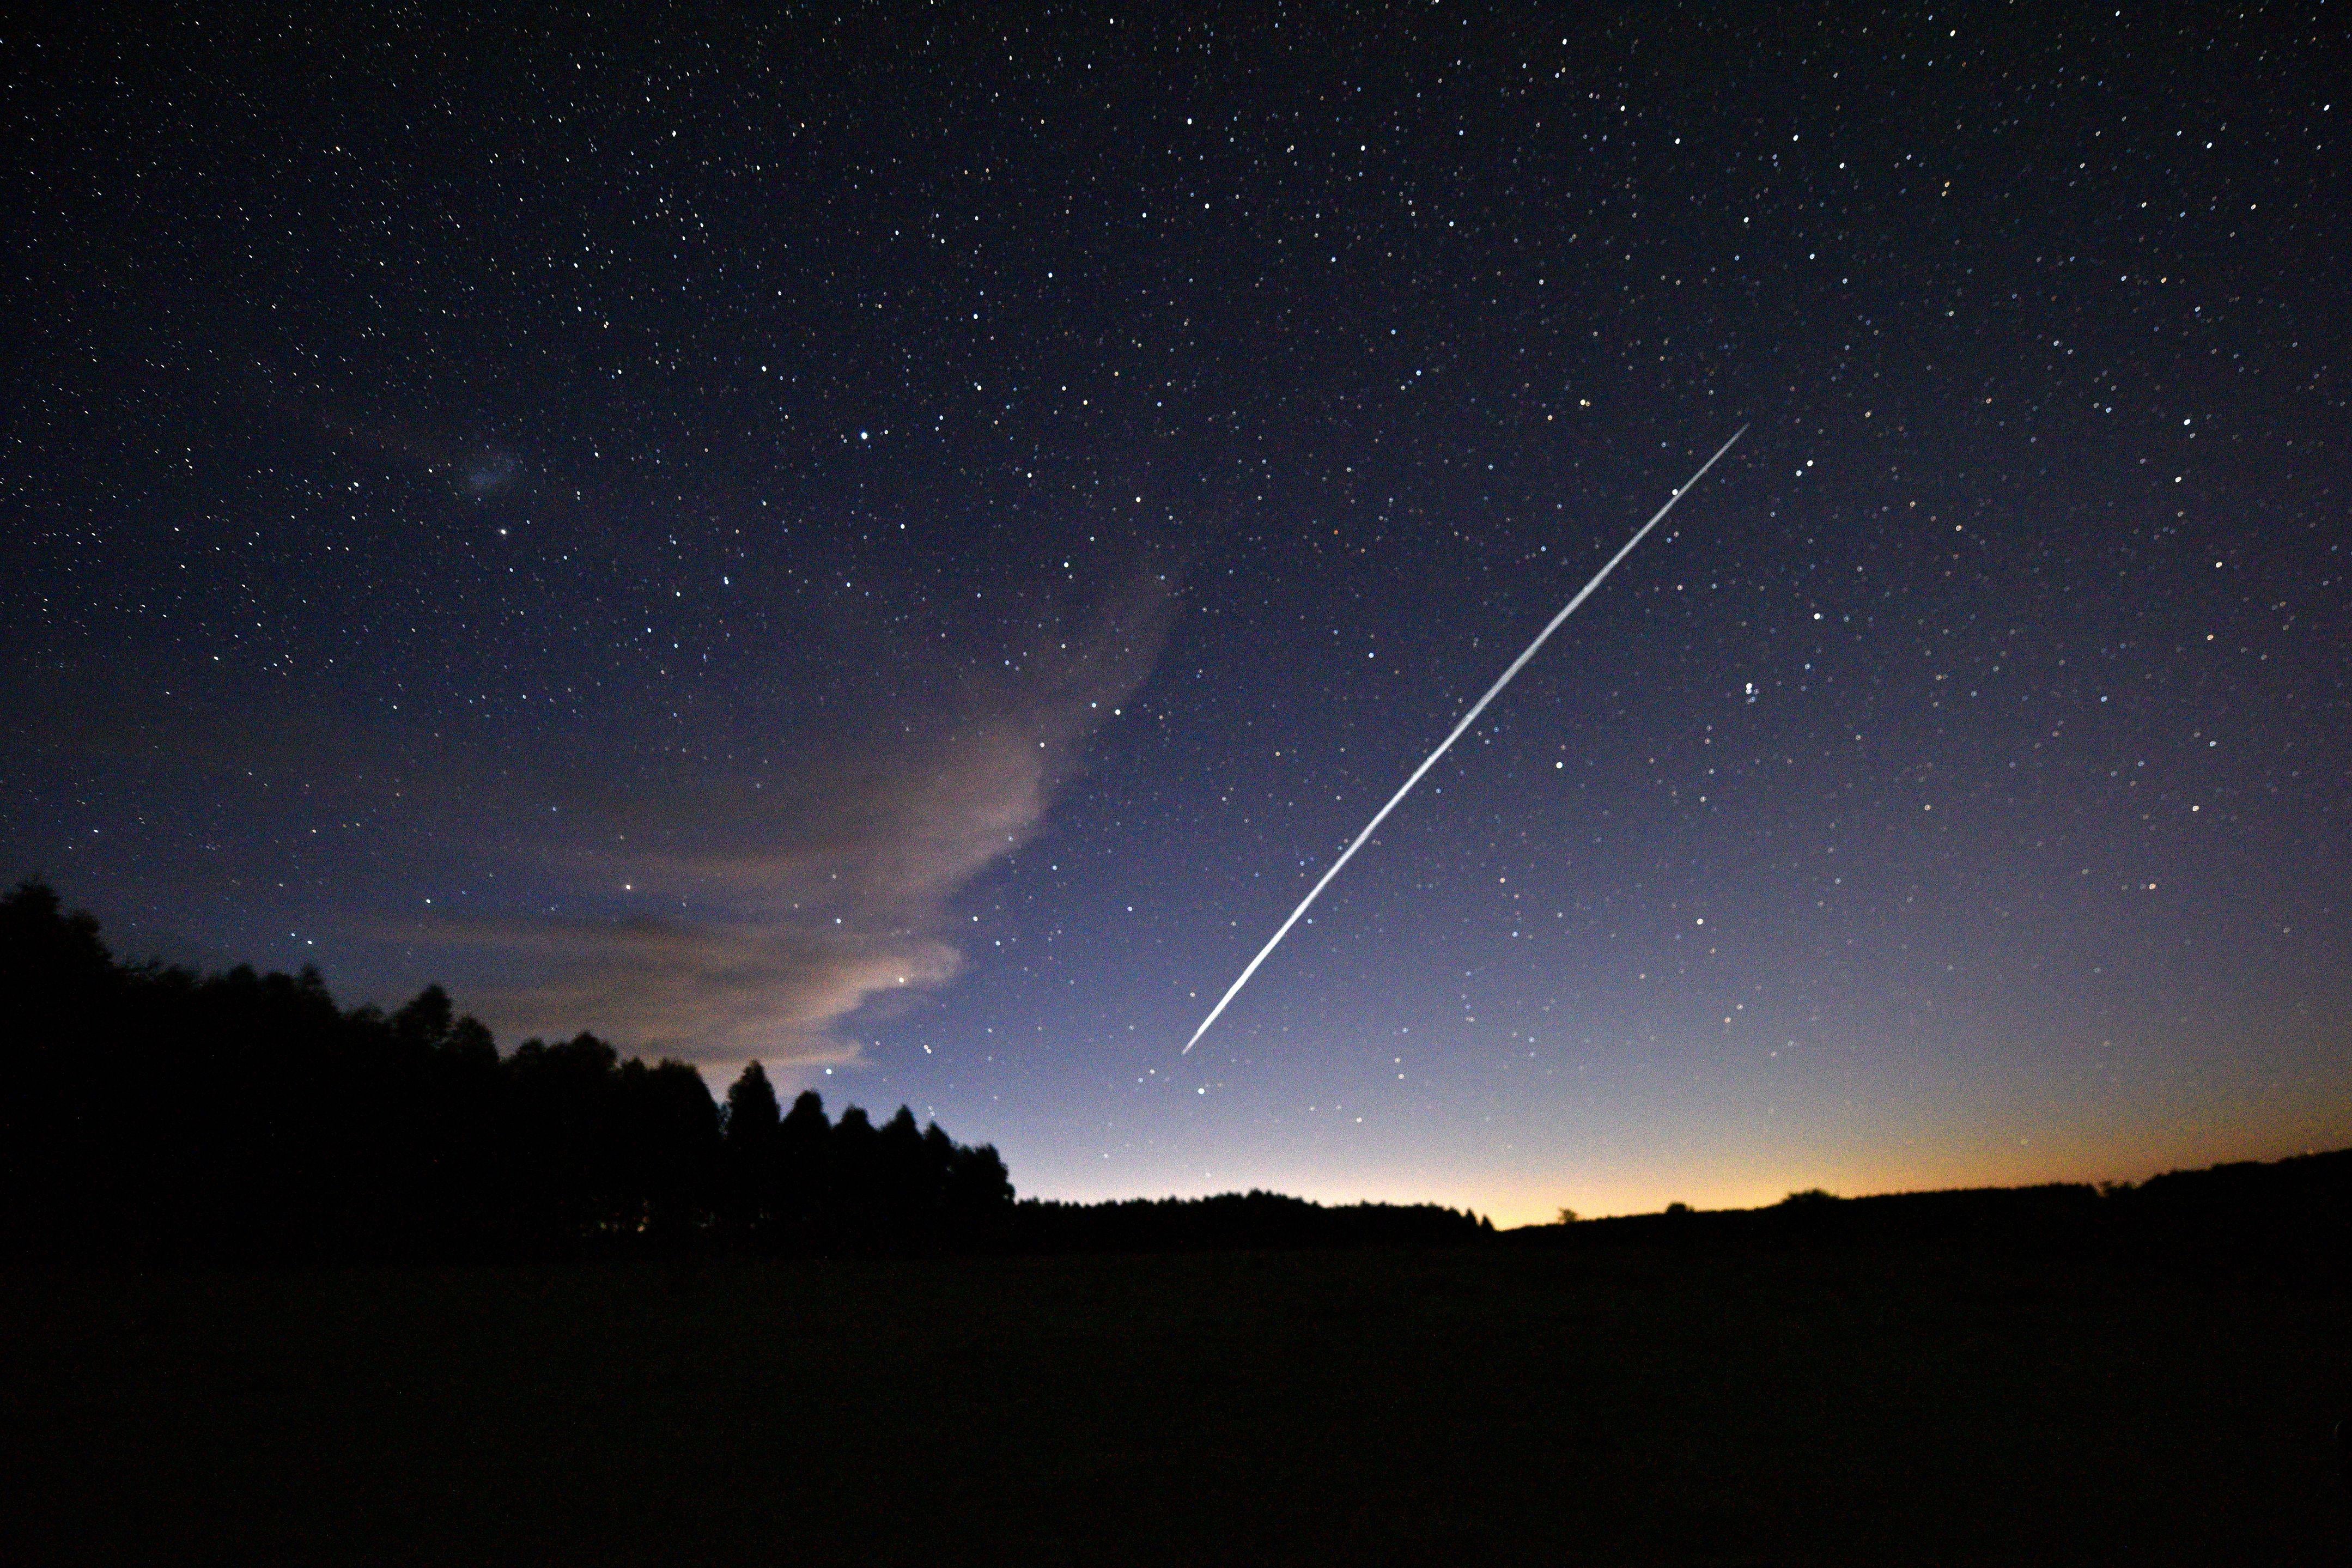 A long-exposure image of a Starlink satellite crossing the night sky, a bright line across a background of stars.